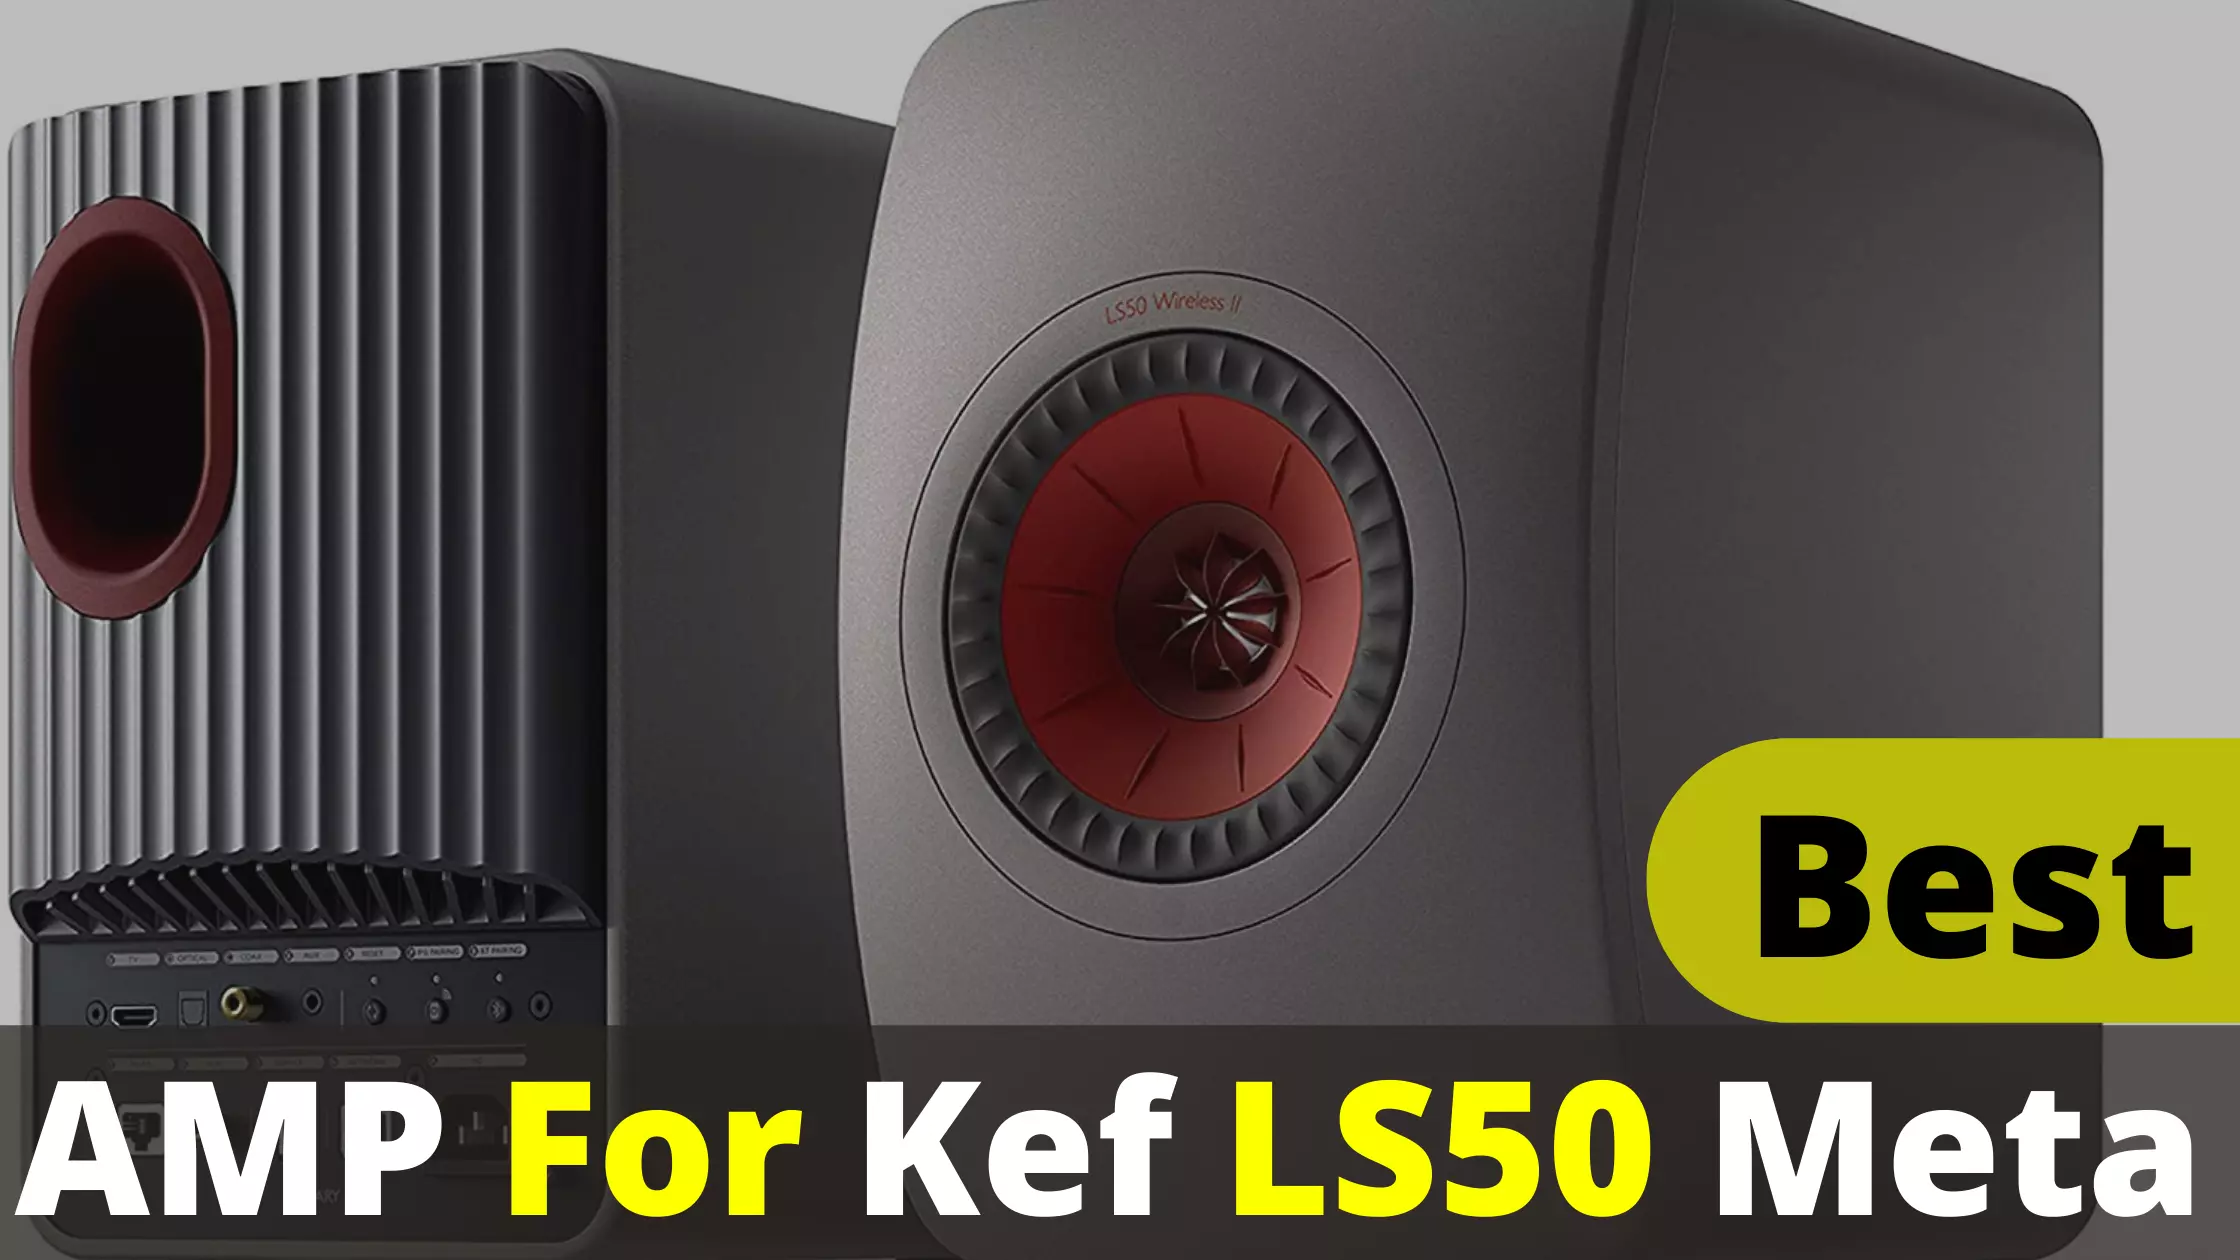 Best Amp For Kef ls50 Meta - Latest Recommendations